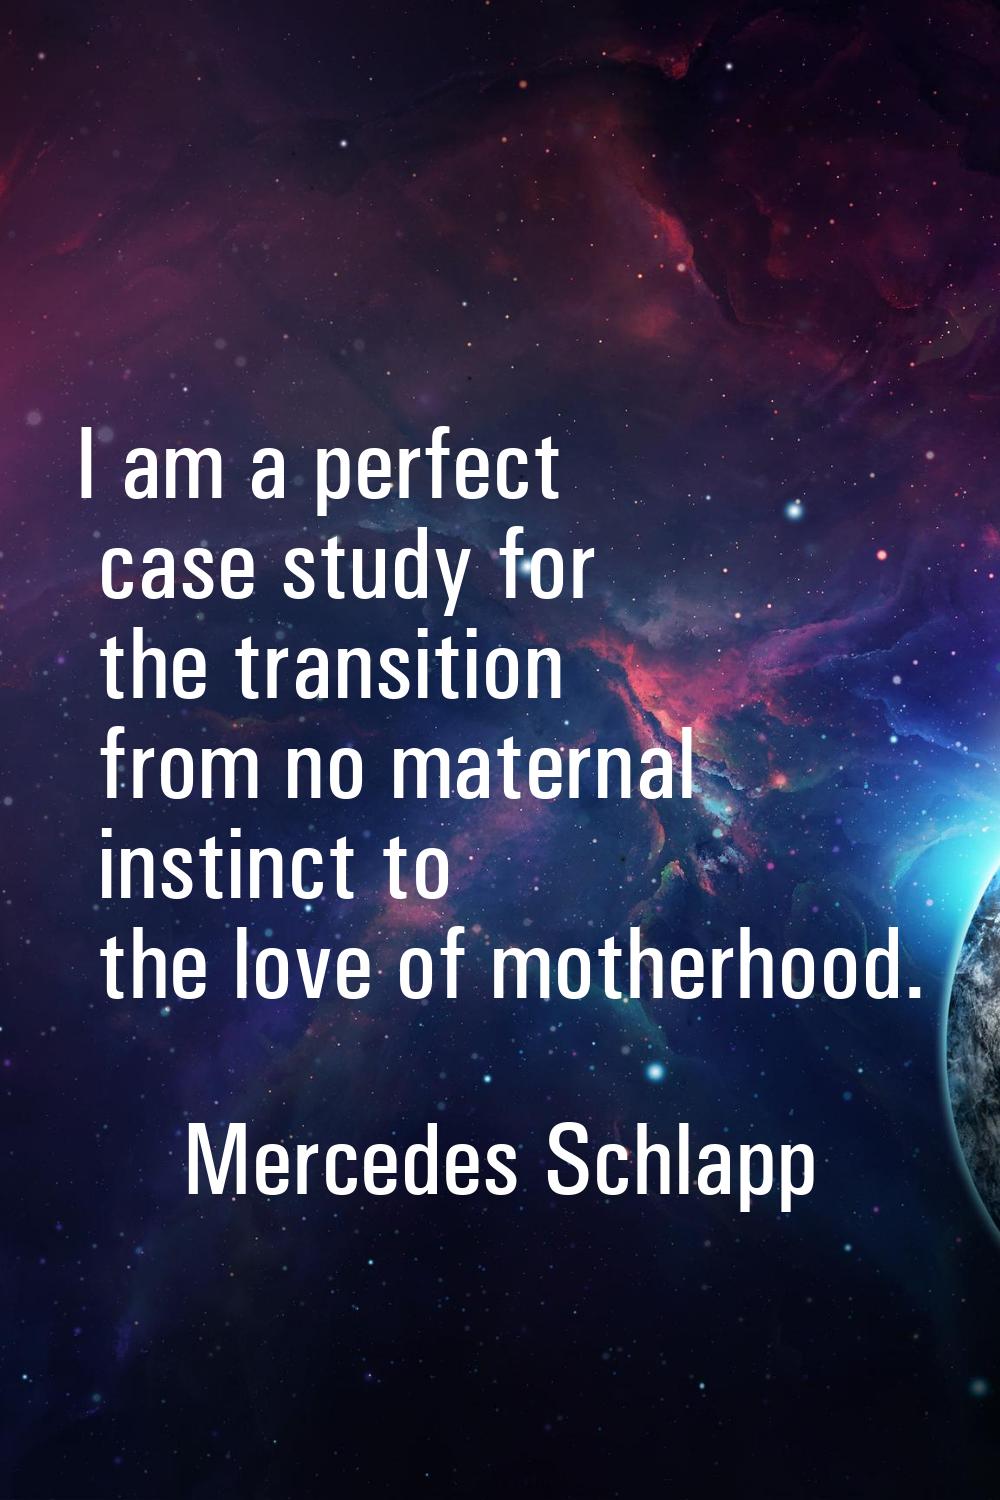 I am a perfect case study for the transition from no maternal instinct to the love of motherhood.